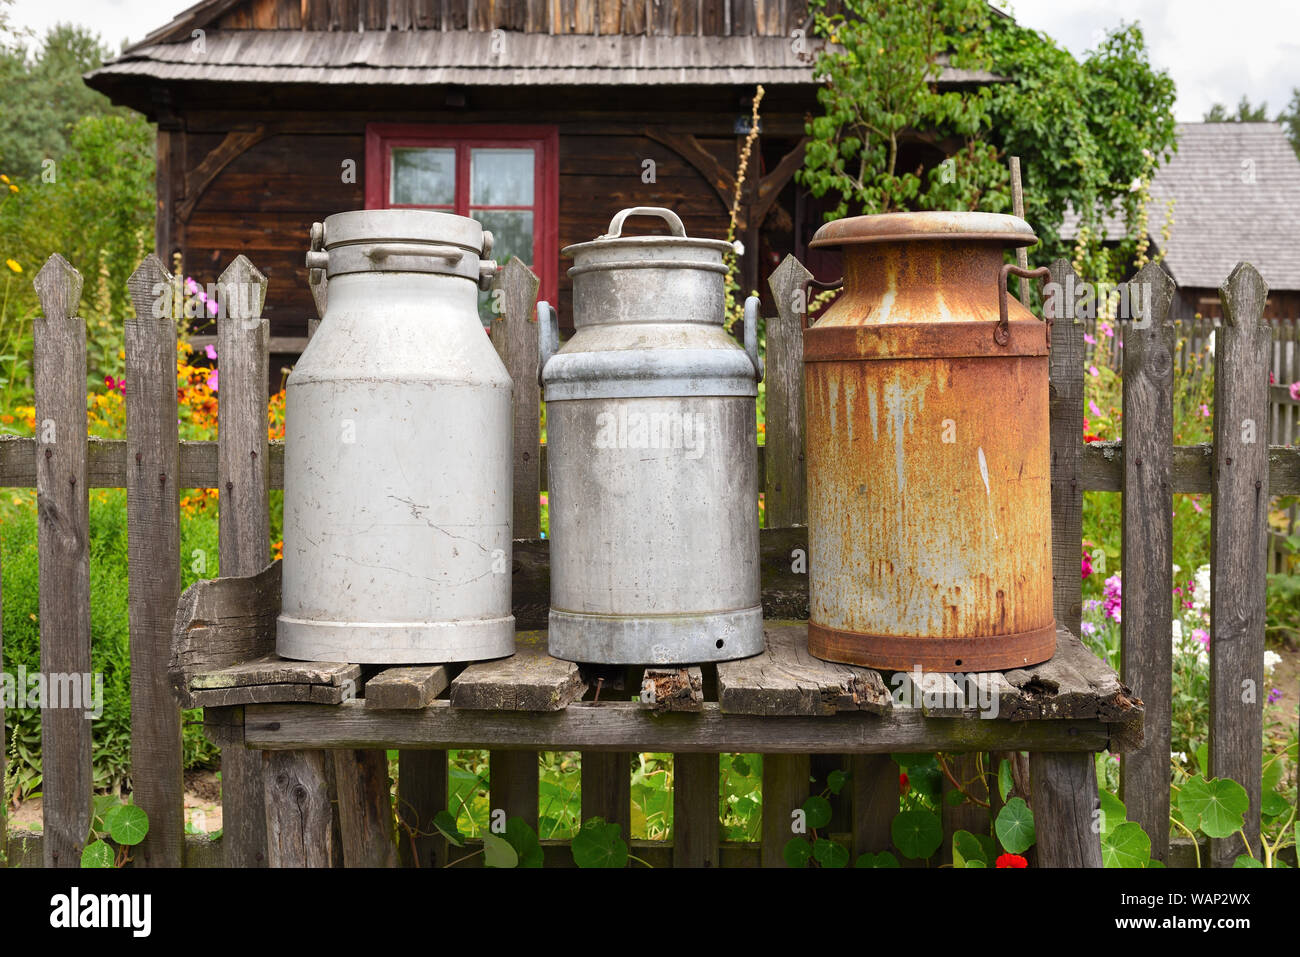 Old milk cans in The Folk Culture Museum in Osiek by the river Notec, the open-air museum presents polish folk culture. Poland, Europe Stock Photo